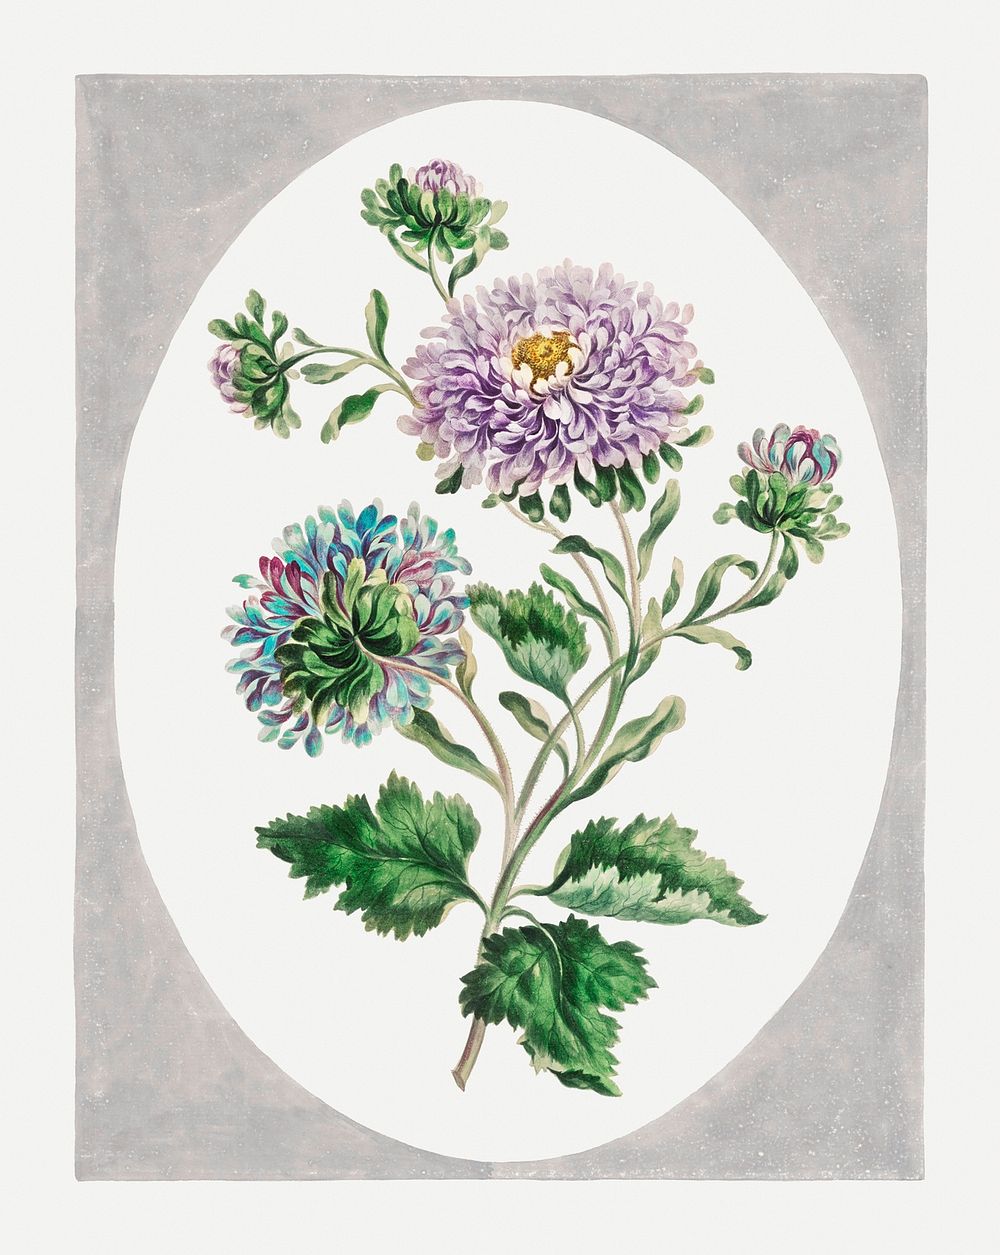 China Aster psd vintage floral art print, remixed from artworks by John Edwards